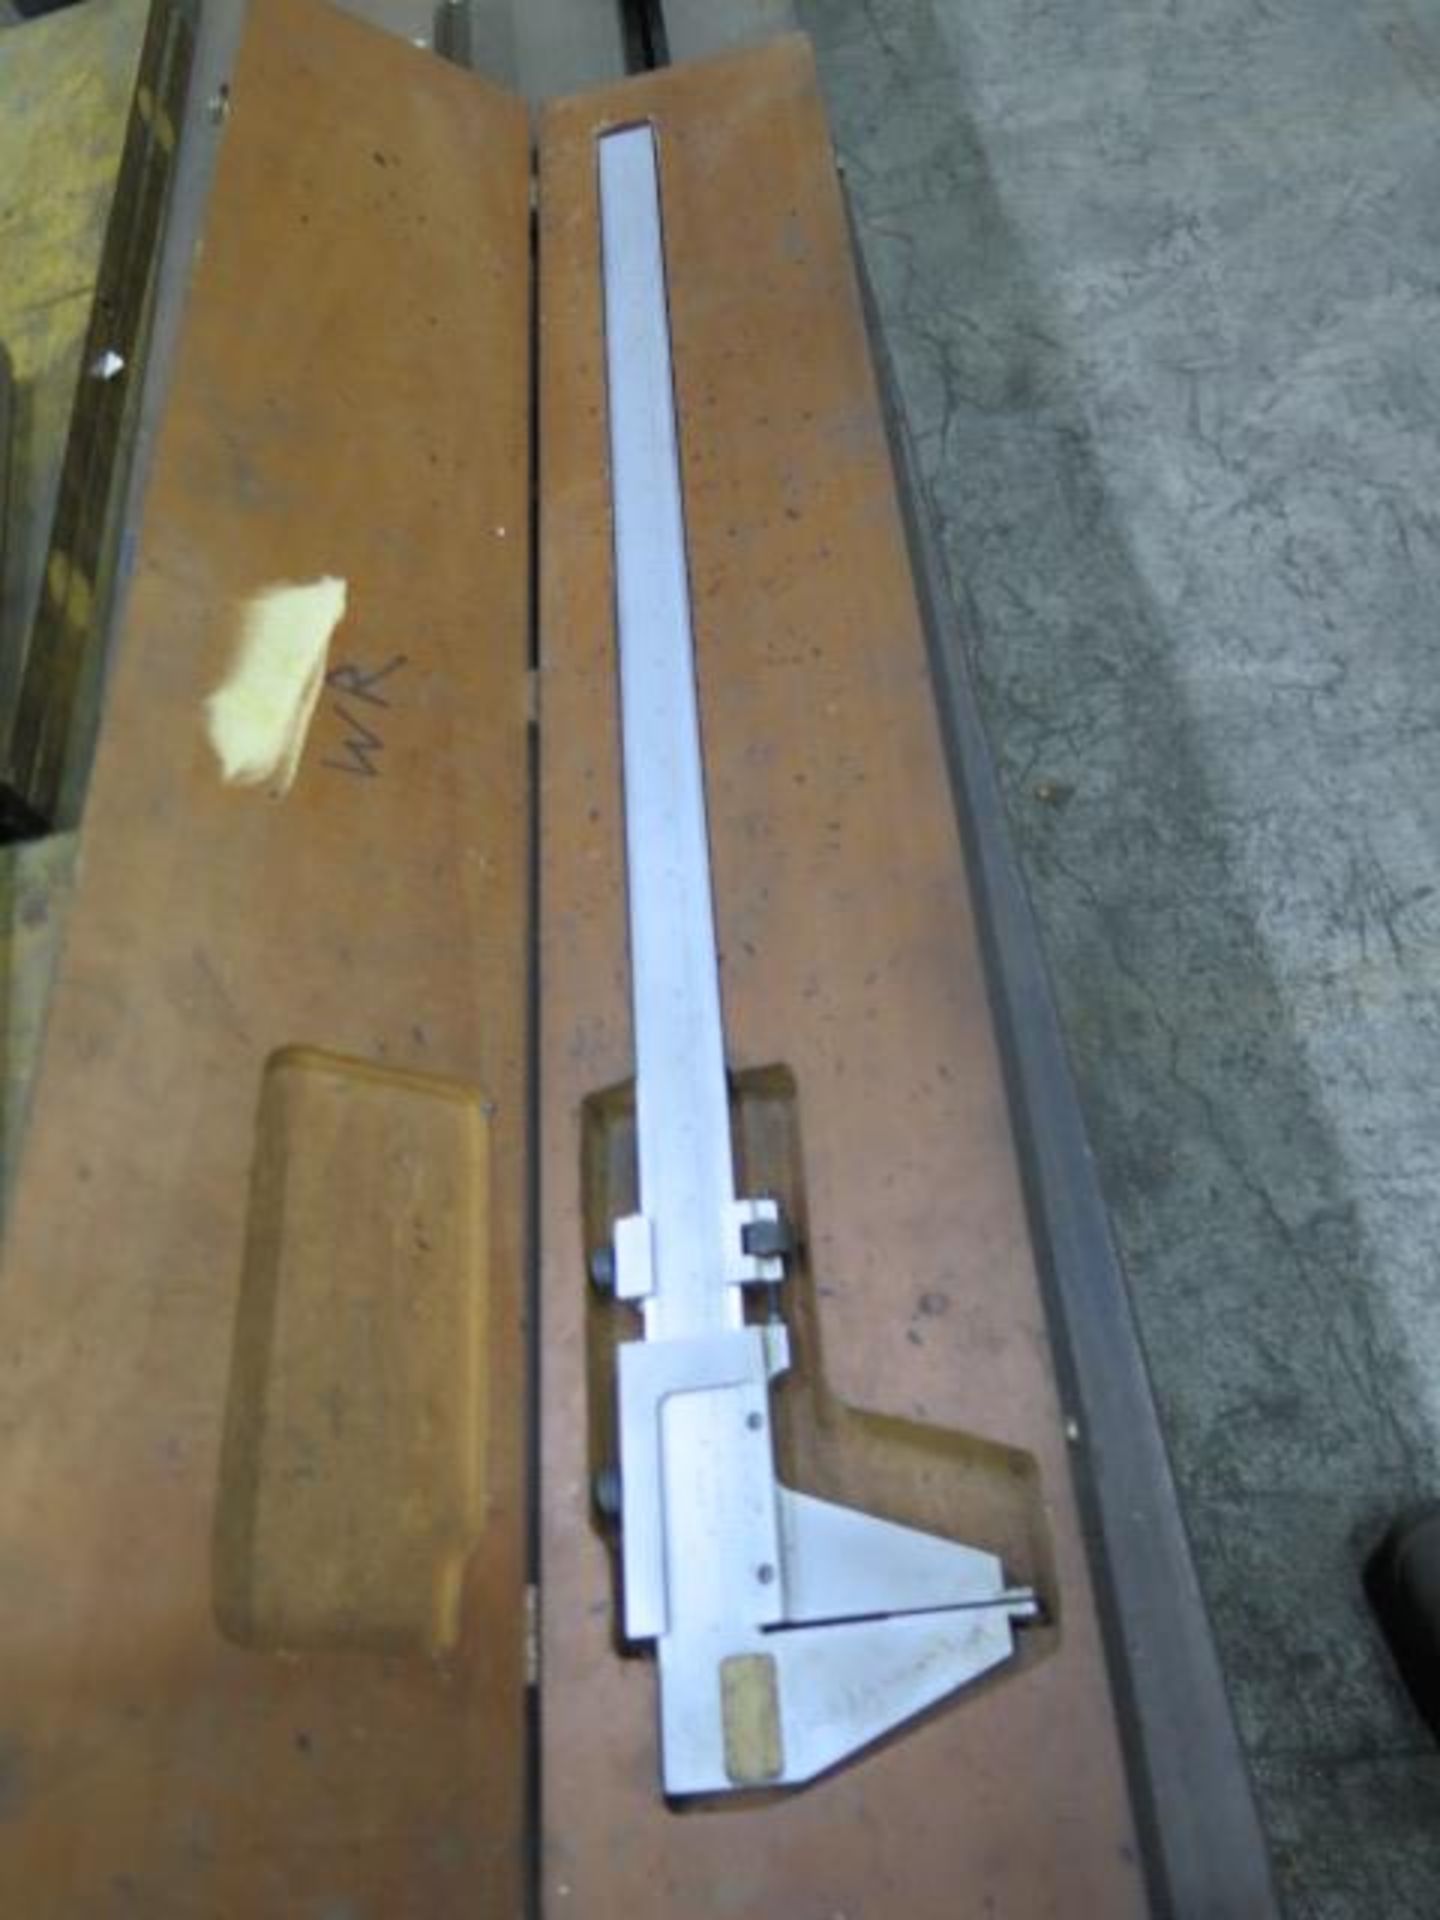 Starrett and Scherr Timoco 24" Vernier Calipers (2) (SOLD AS-IS - NO WARRANTY) - Image 5 of 7